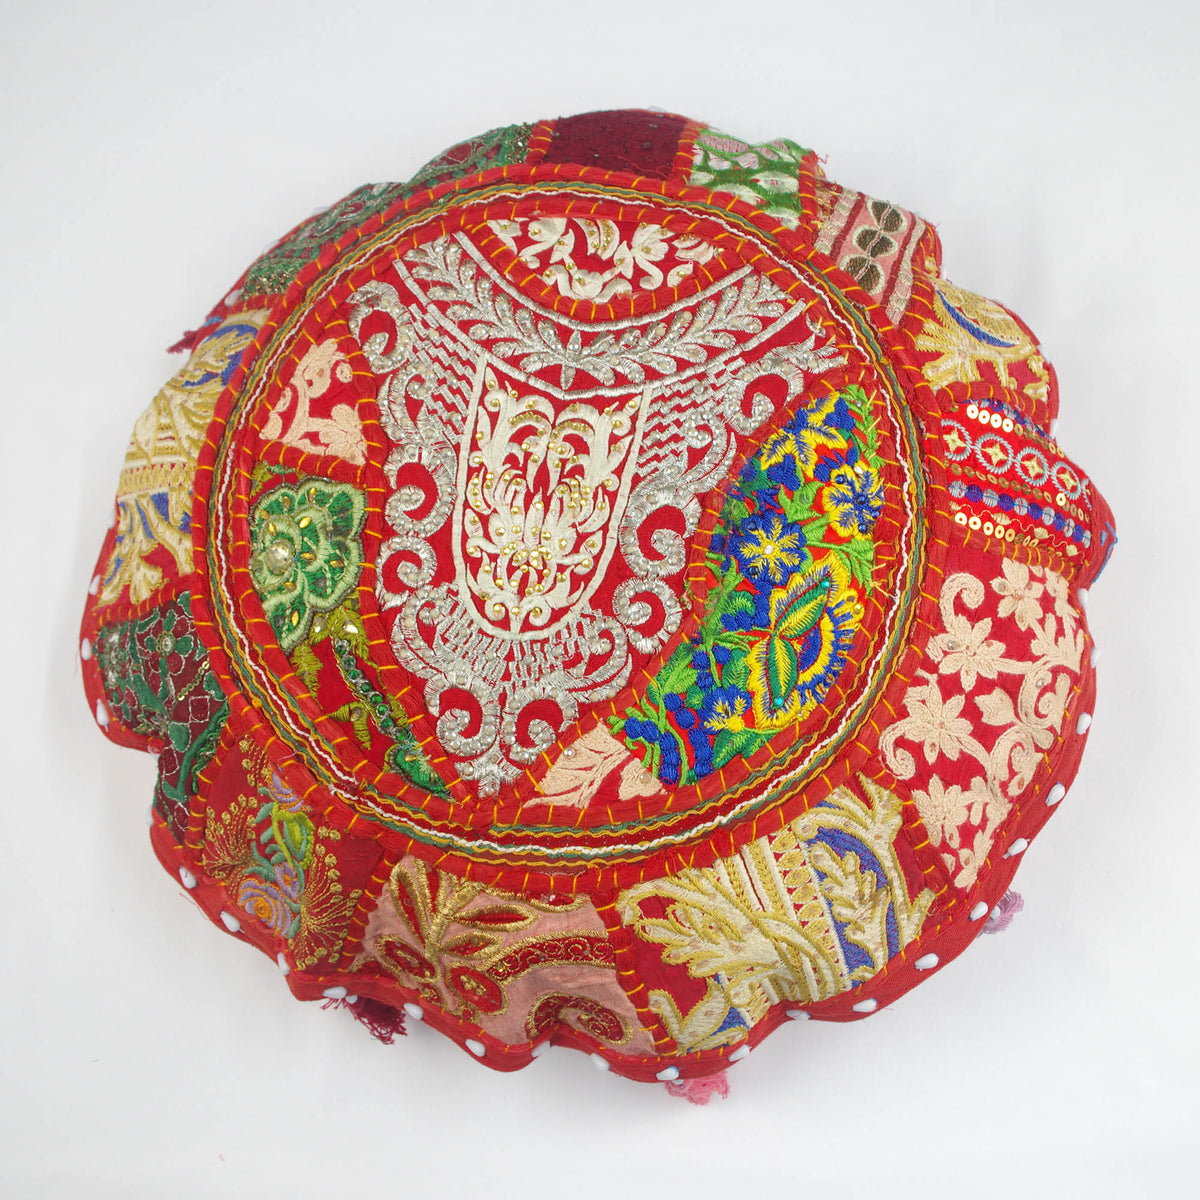 Red Round Floor Embroidered Patchwork Pouf Ottoman Indian Vintage Cushion Cover 18"